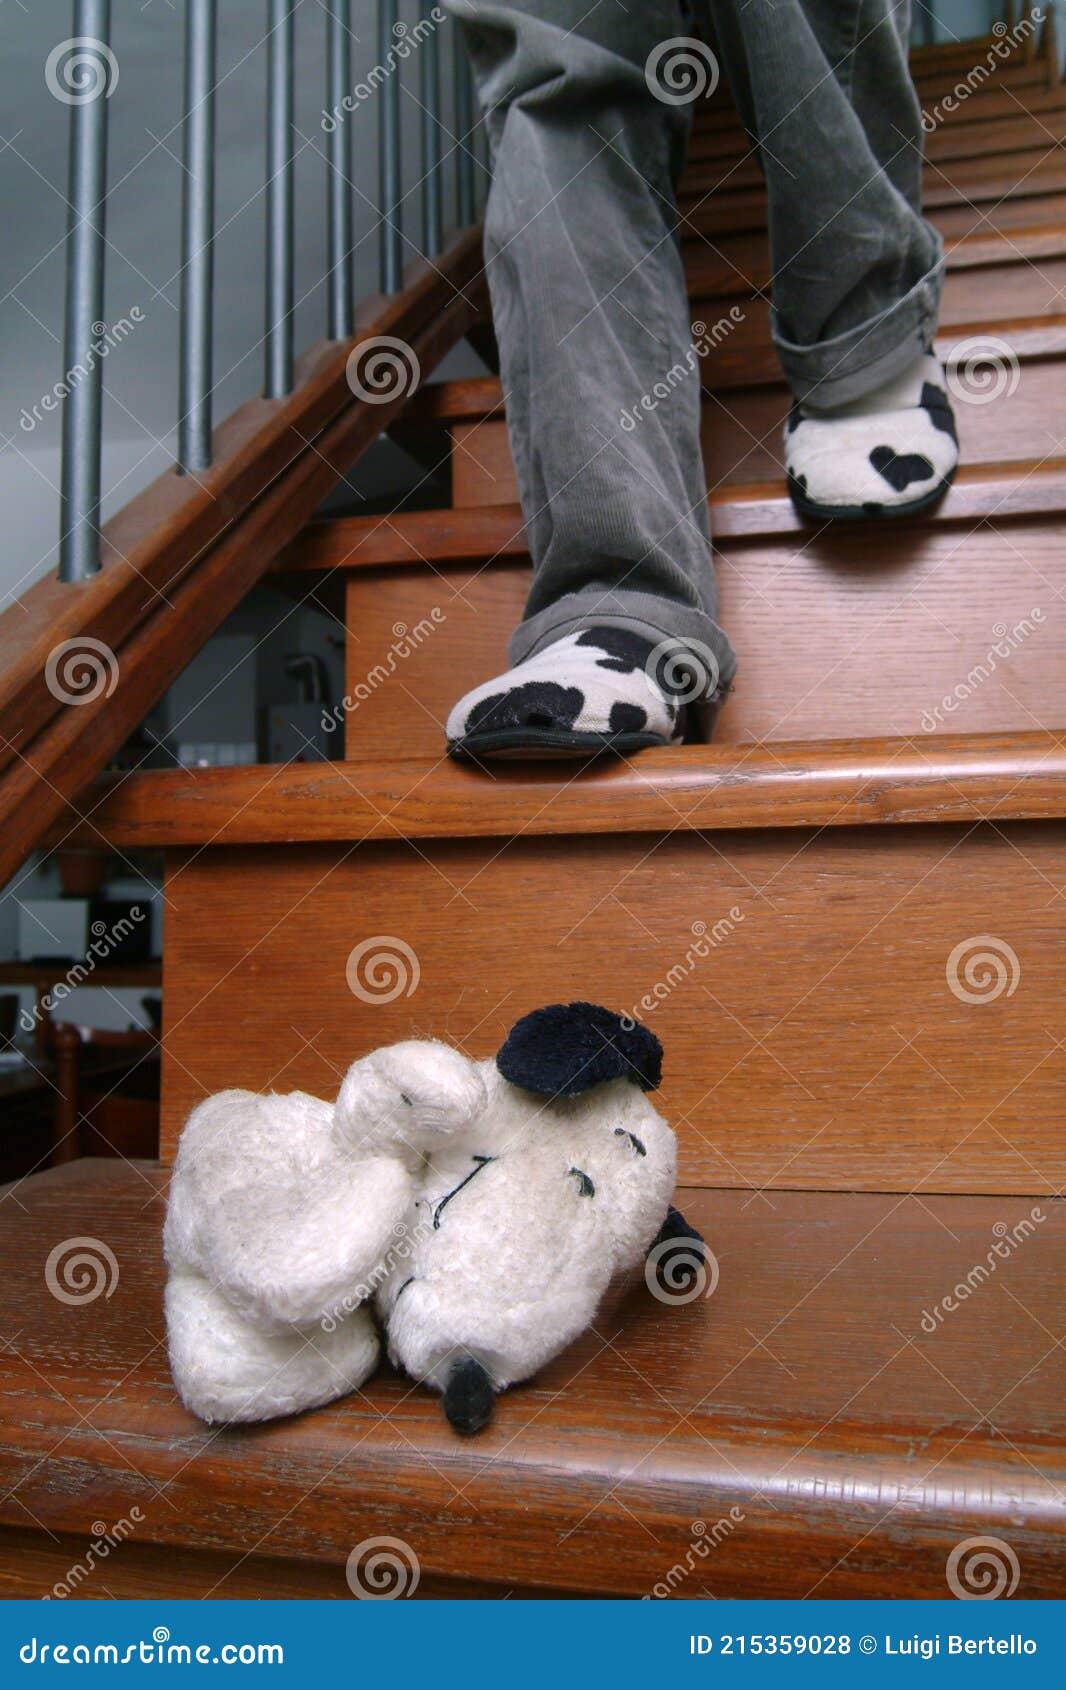 Senior Man Fell Down the Stairs Stock Image - Image of trip, injury: 73729083